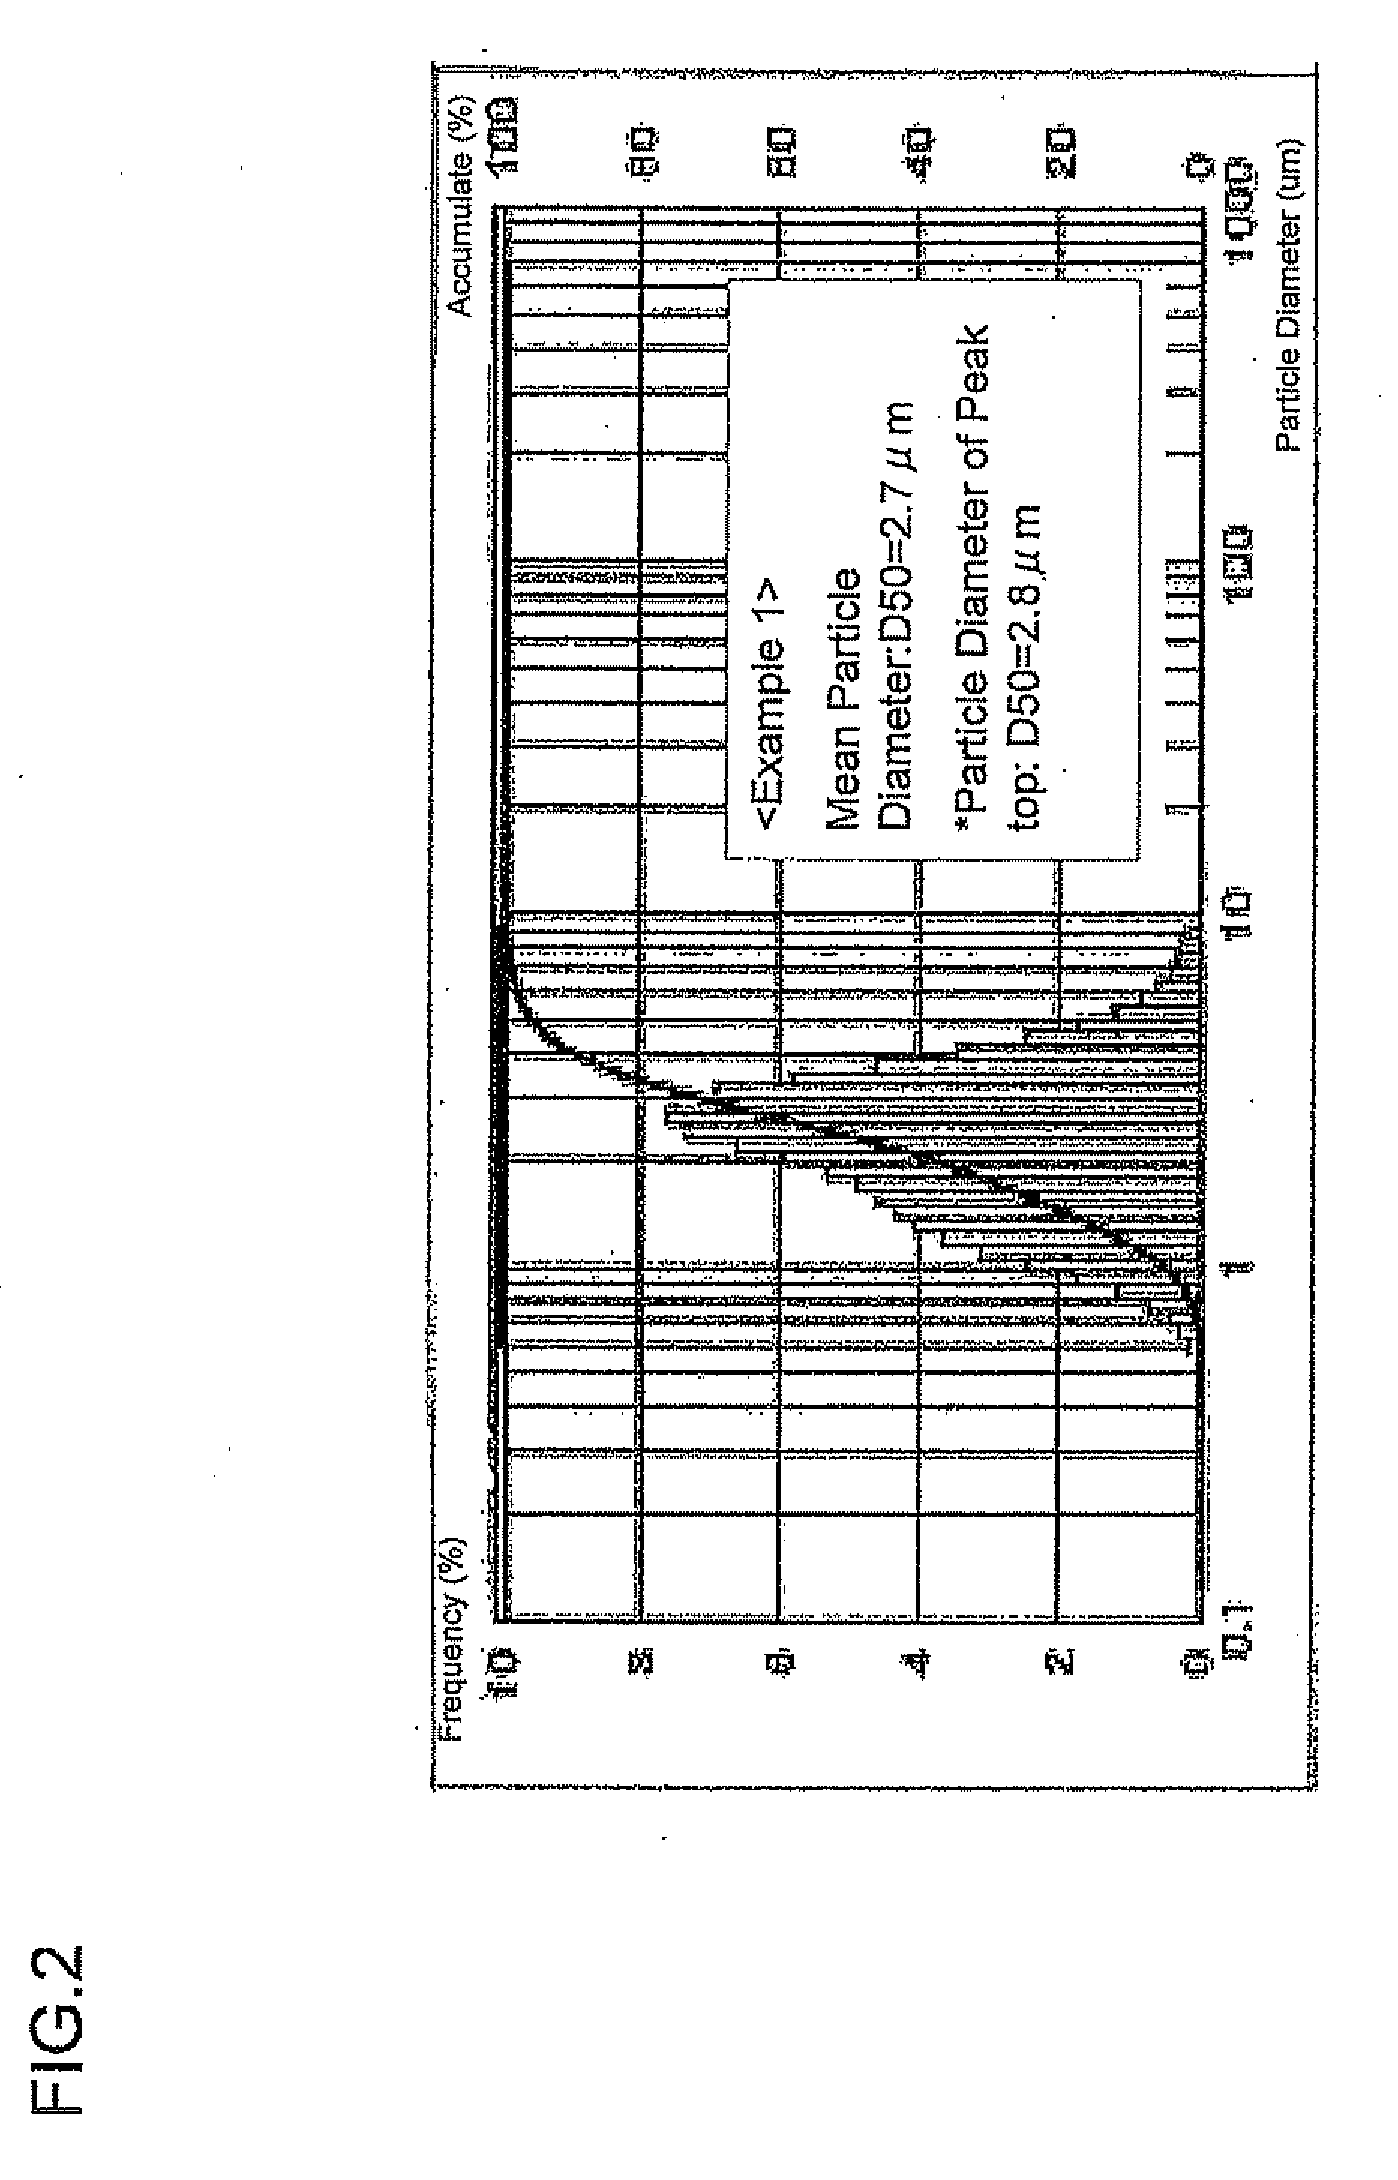 Lithium Transition Metal Oxide Having Layered Structure